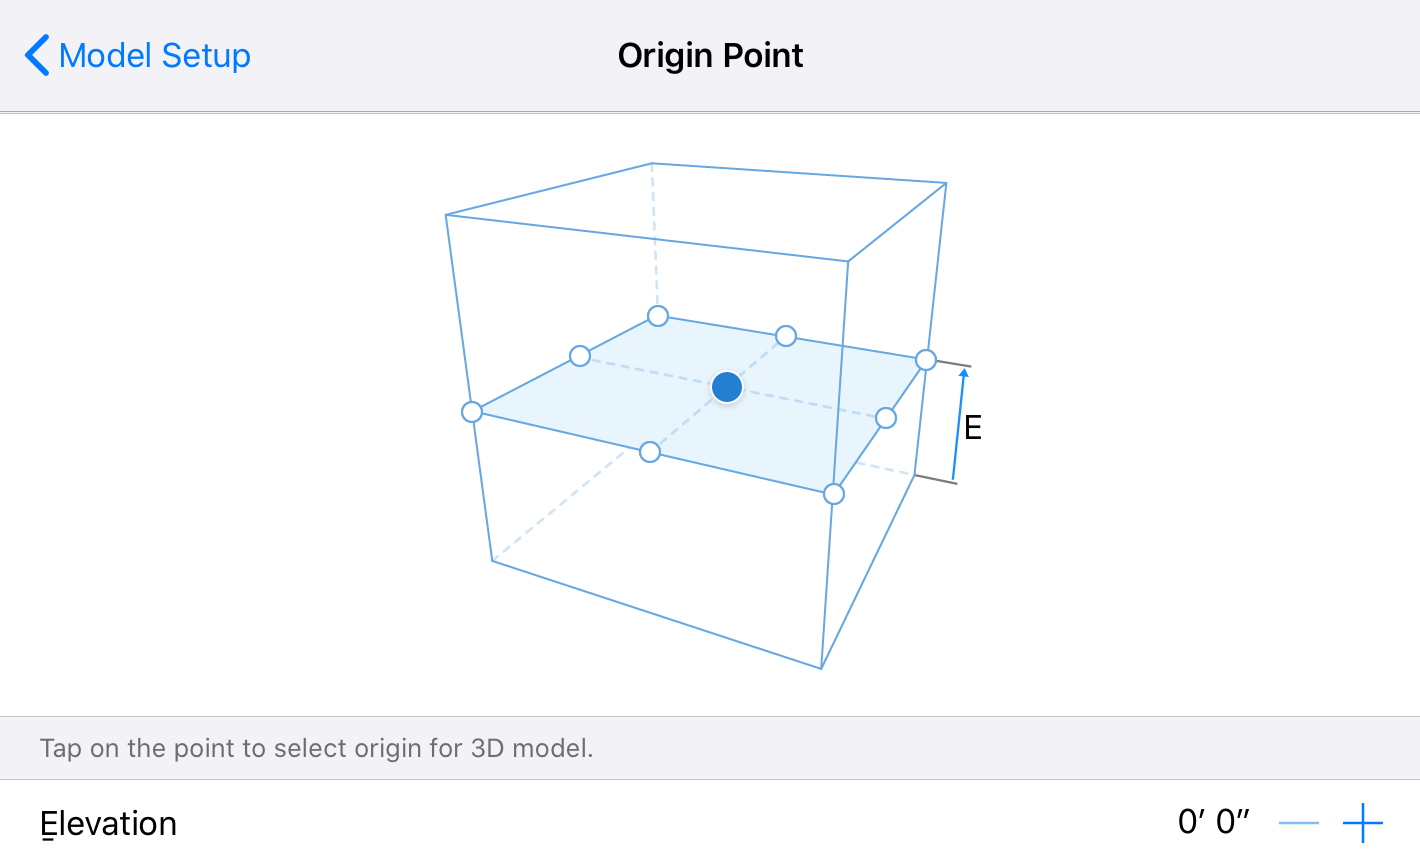 Settings to define the origin point and elevation of the 3D model in AR.